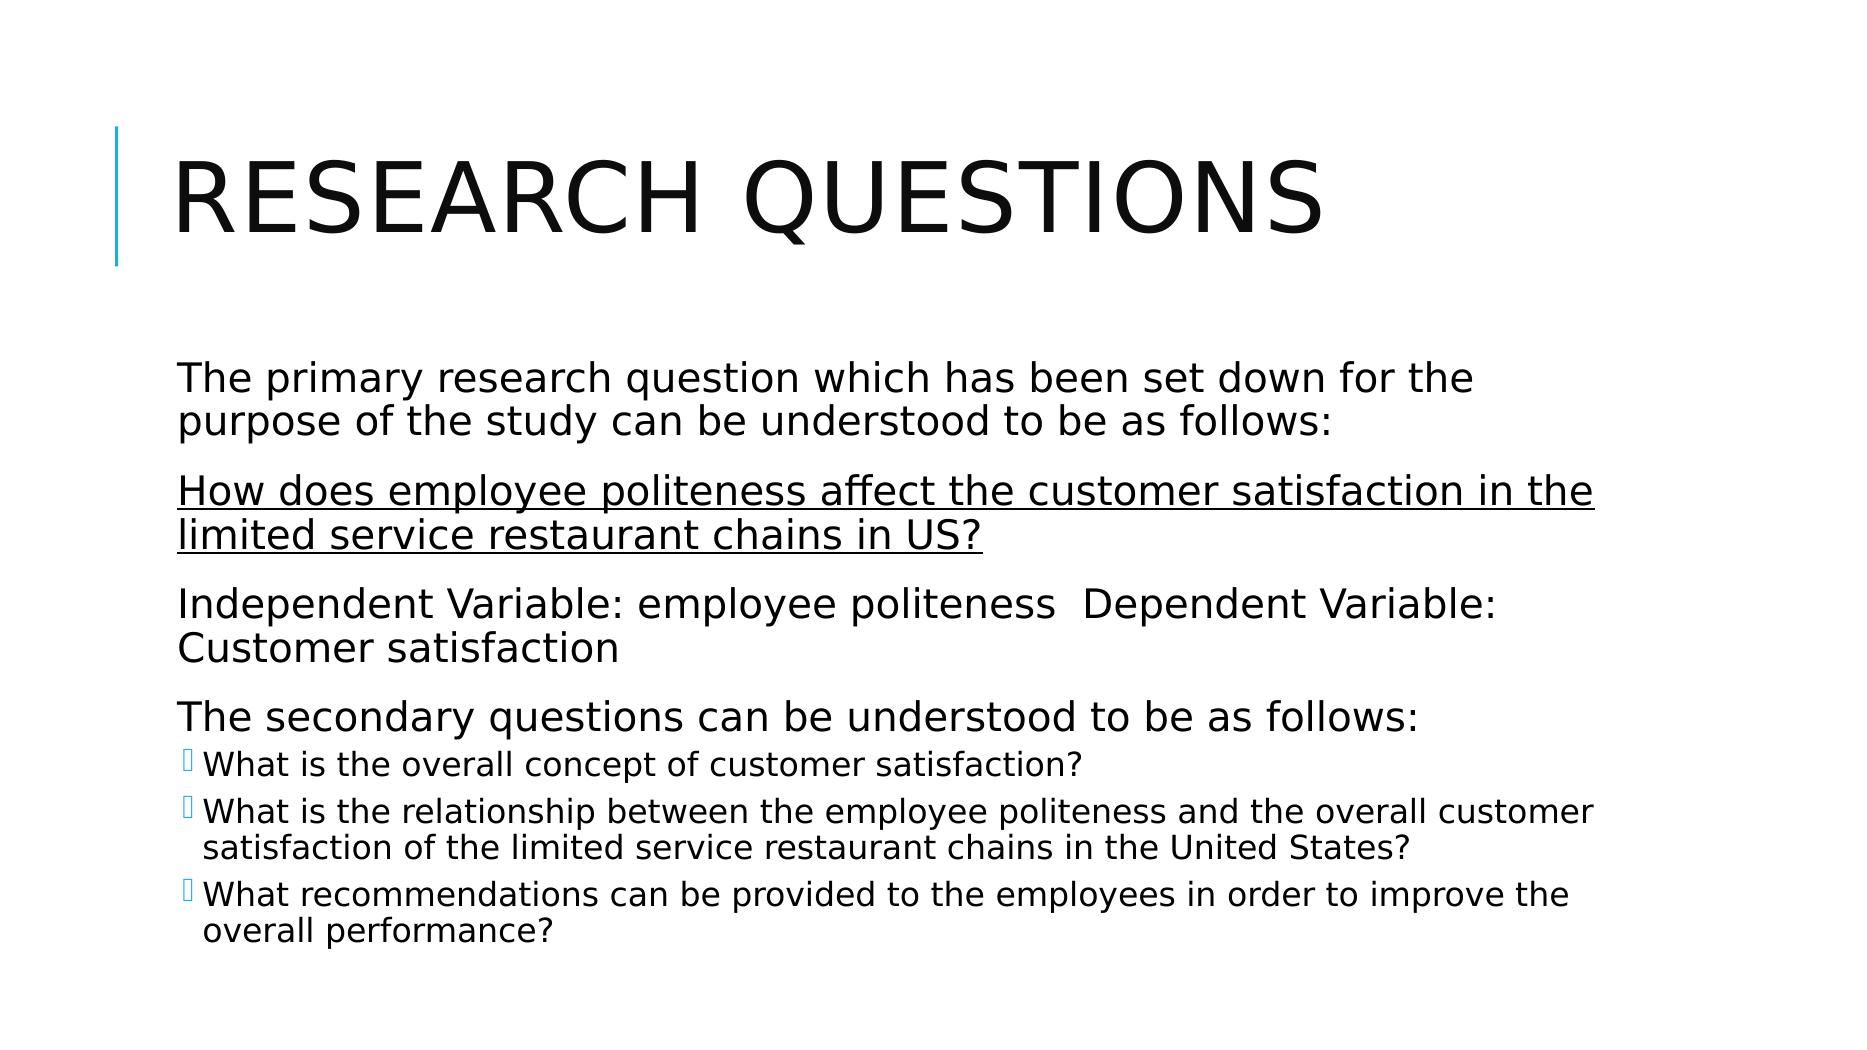 Assignment | Politeness affect the customer satisfaction in the limited service restaurant chains in   US_2